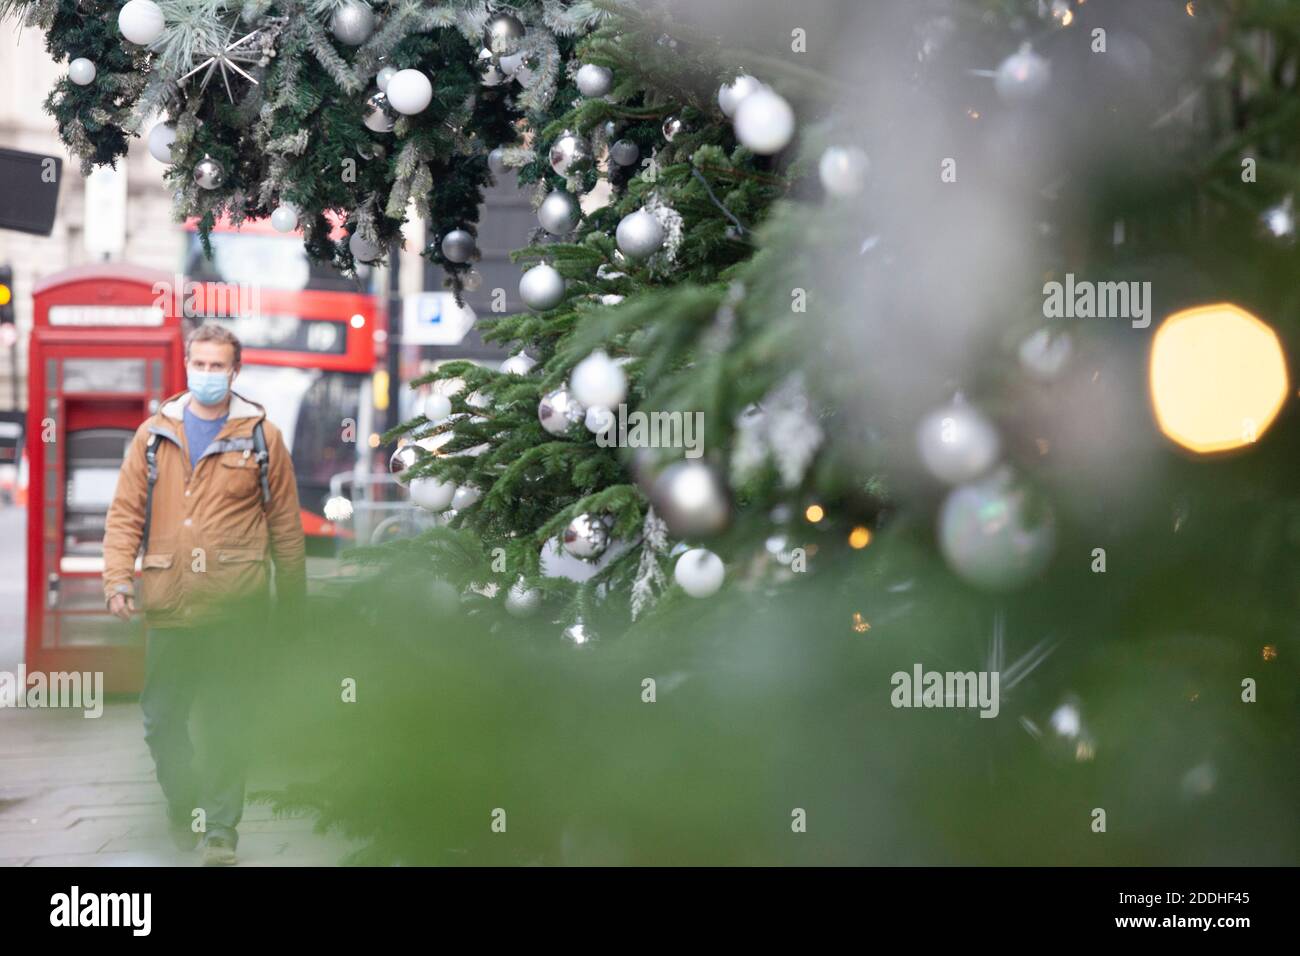 London, UK, 25 November 2020: Shops in London are shut and Harvey Nichols has neon window displays saying BAH HUMBUG and BRING ON 2021. London Mayor Sadiq Khan has said he wants London to be in Tier 2 of the post-lockdown restrictions.  Anna Watson/Alamy Live News Stock Photo